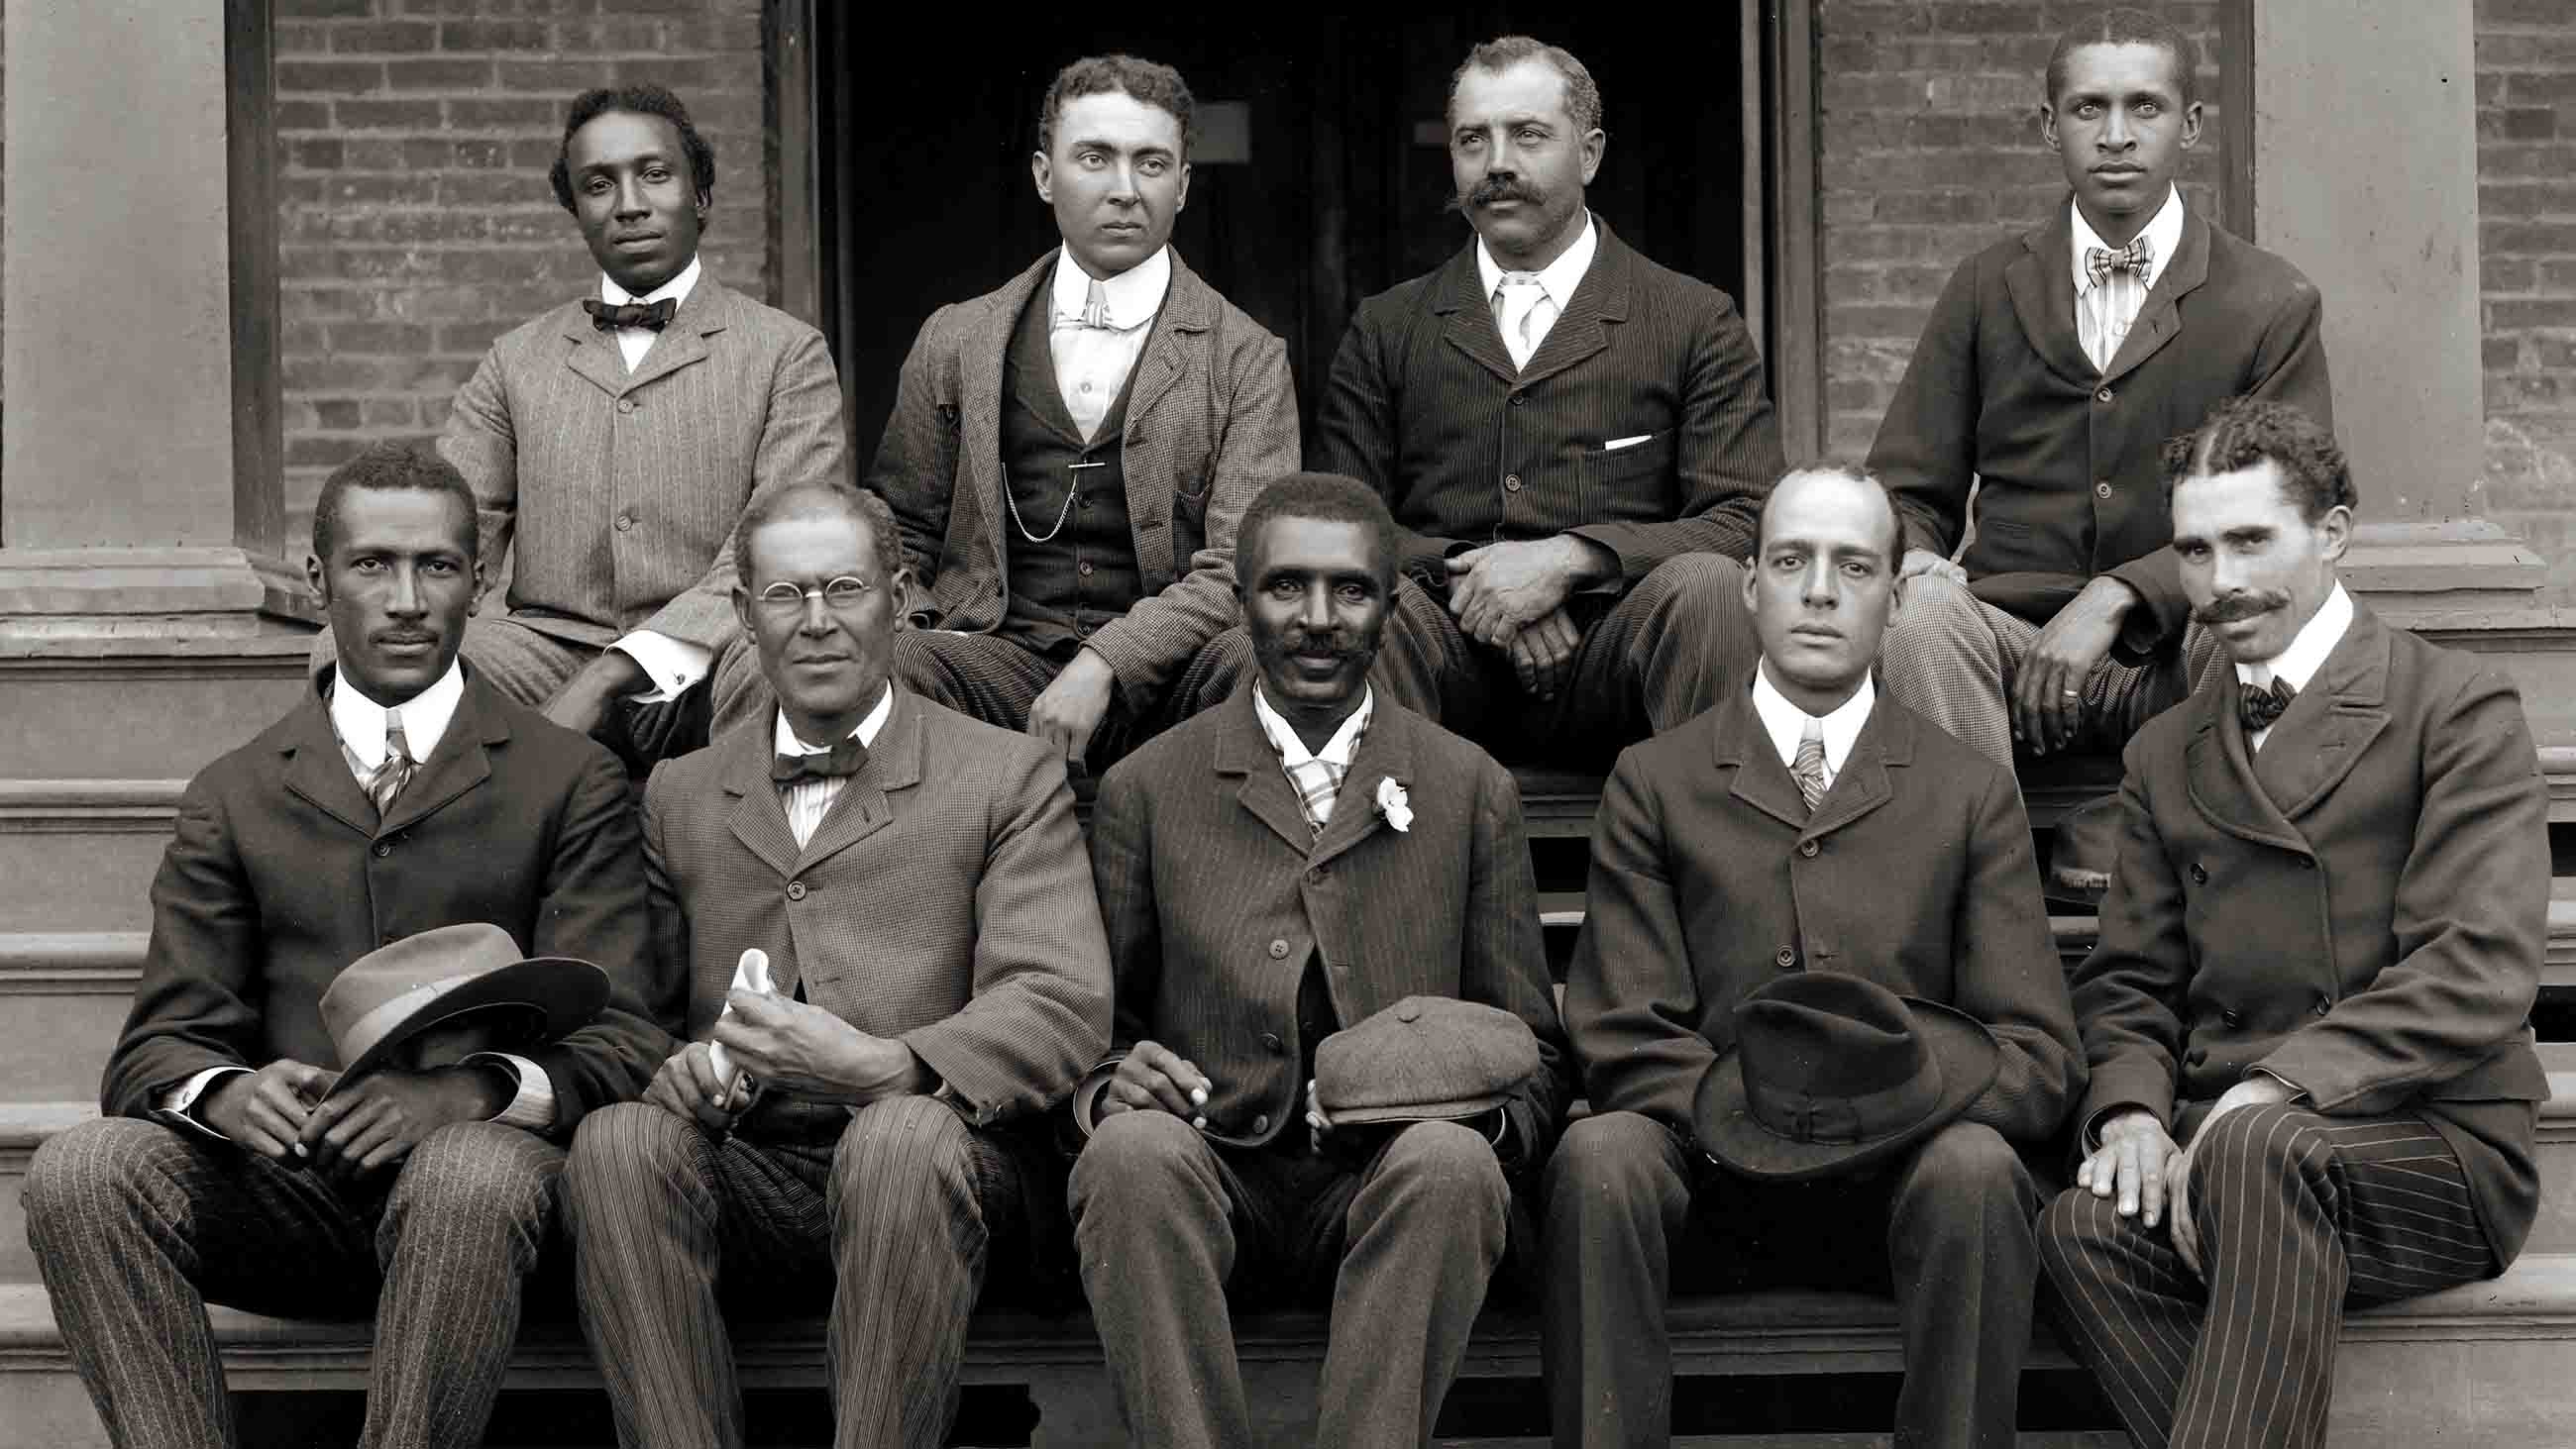 George Washington Carver, seated in the middle of the front row alongside colleagues from the Tuskegee Institute, is remembered mainly for his inventions of peanut products. But his true legacy is more complex.